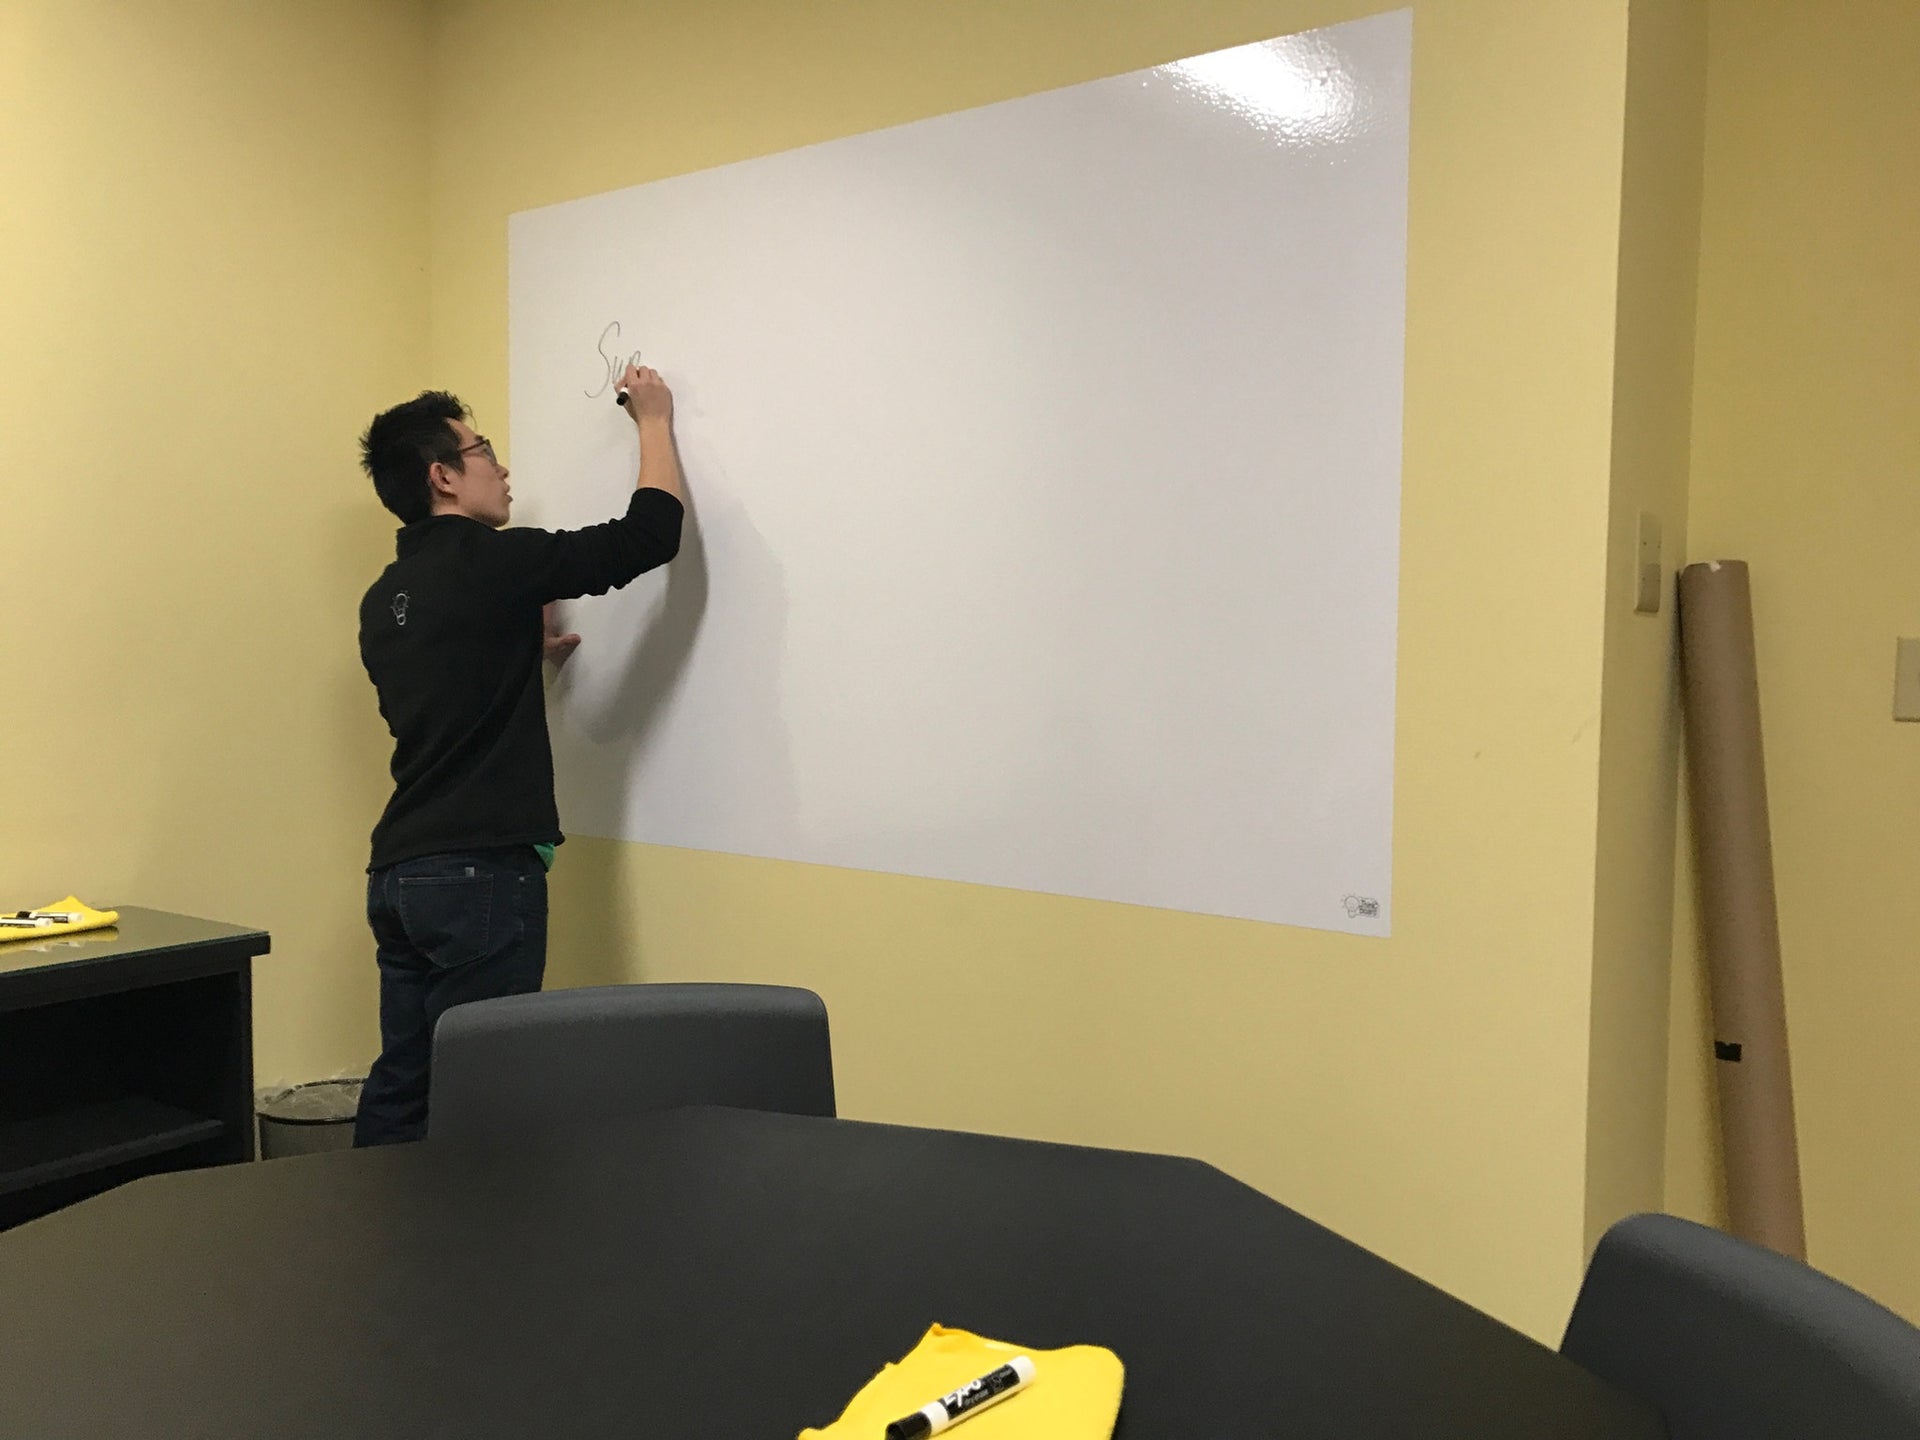 Think Board: The Whiteboard That Will Take Your Creativity to the Next Level